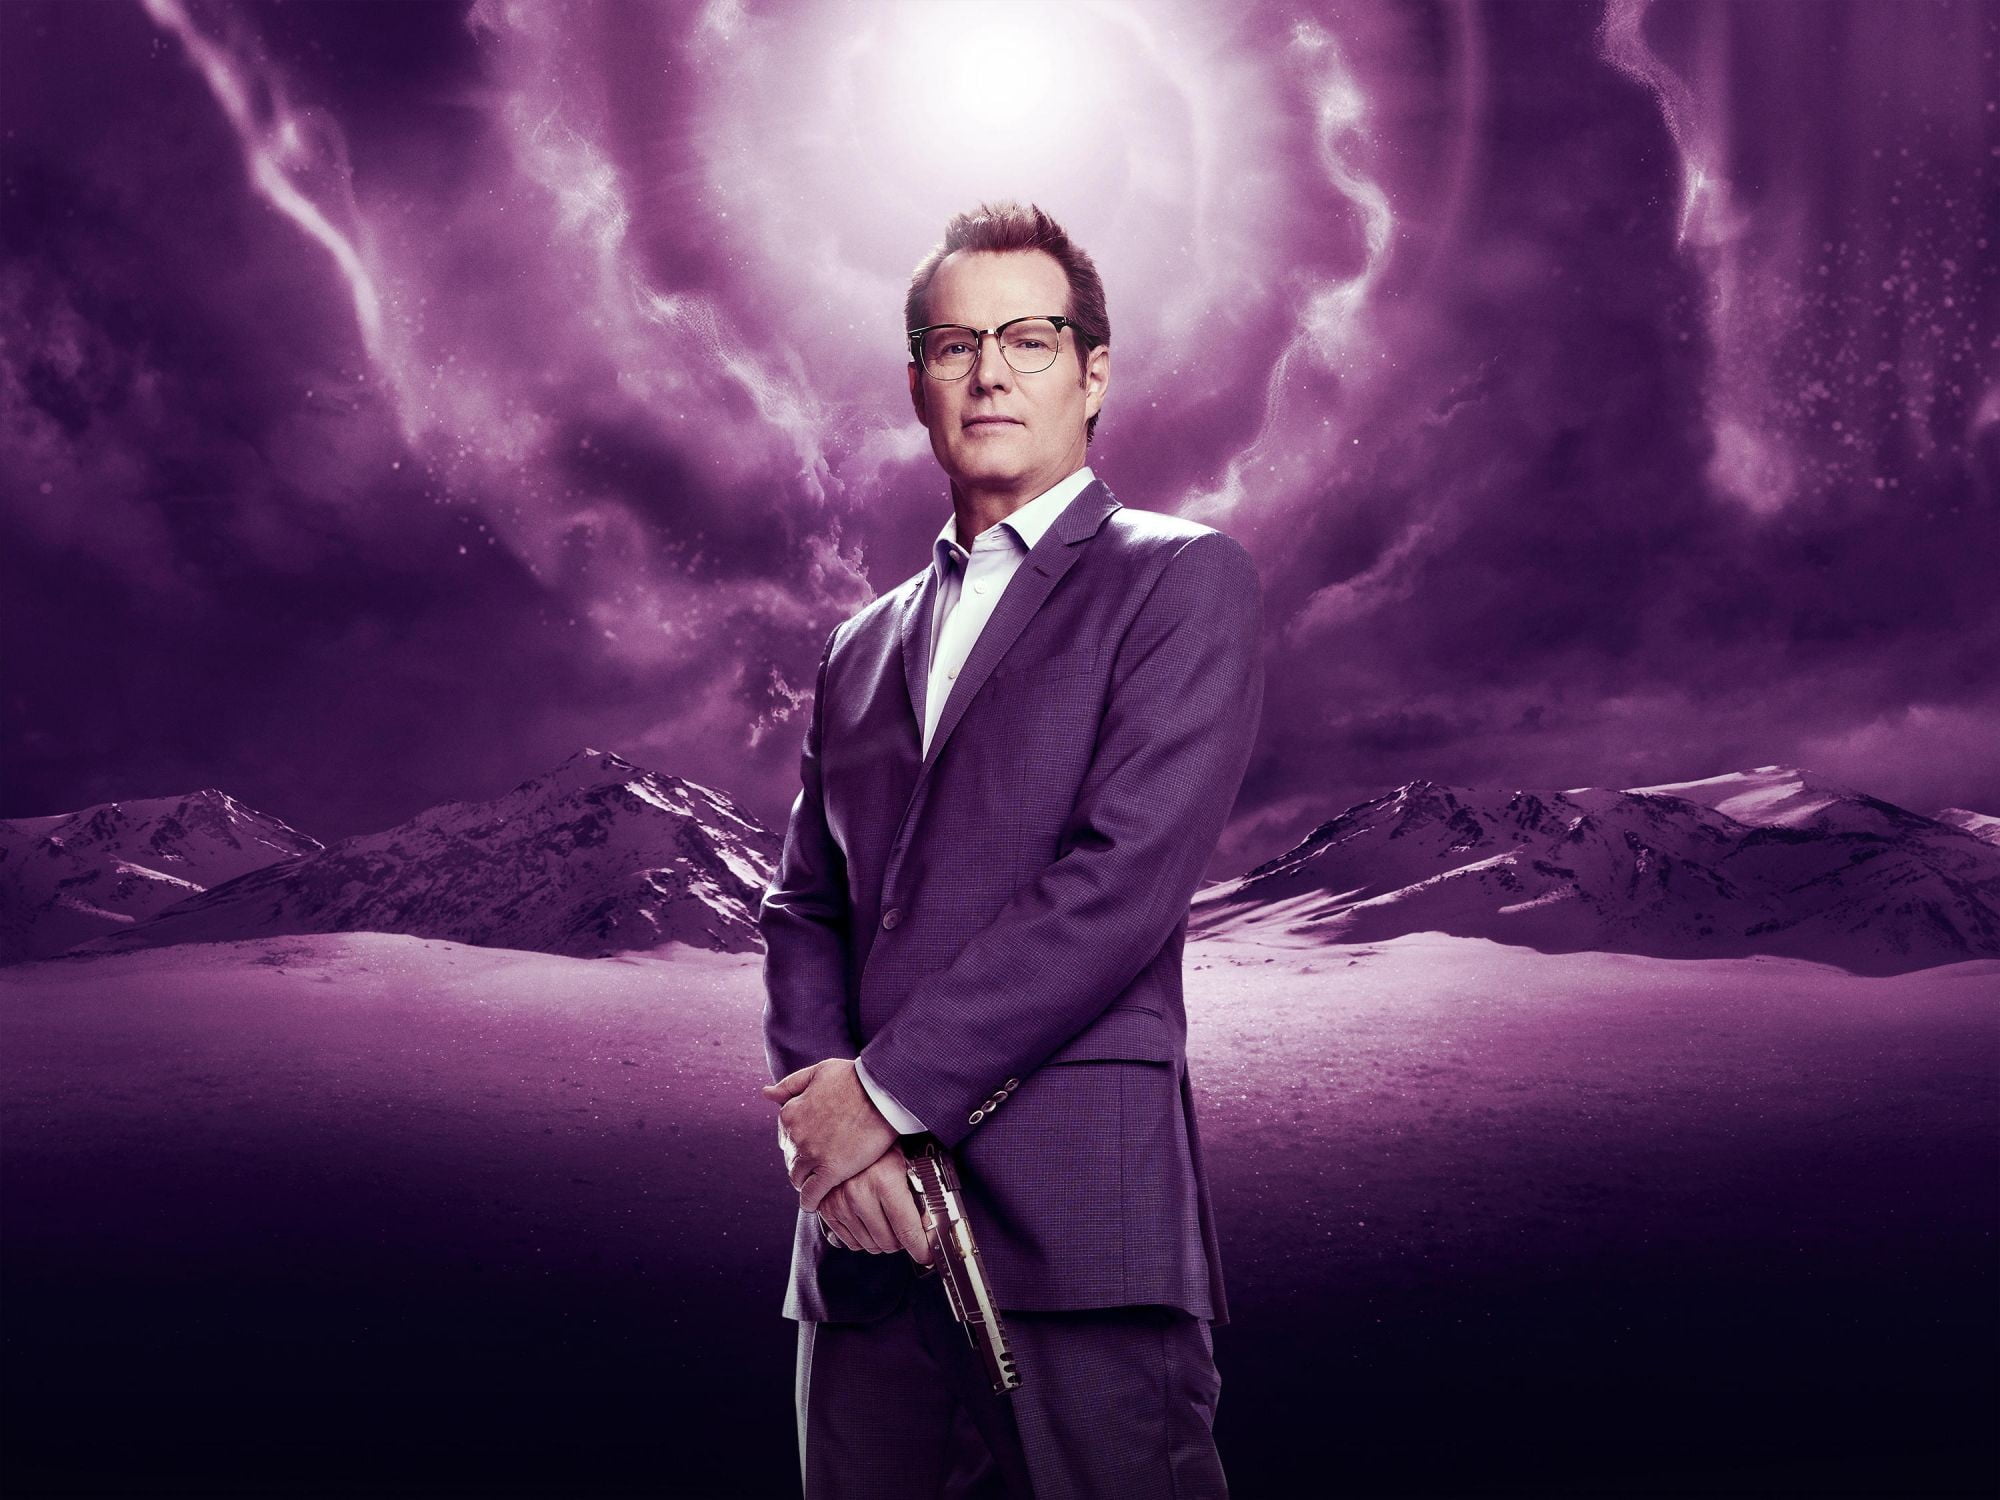 Heroes Reborn, Jack Coleman, adult, standing, night, one person